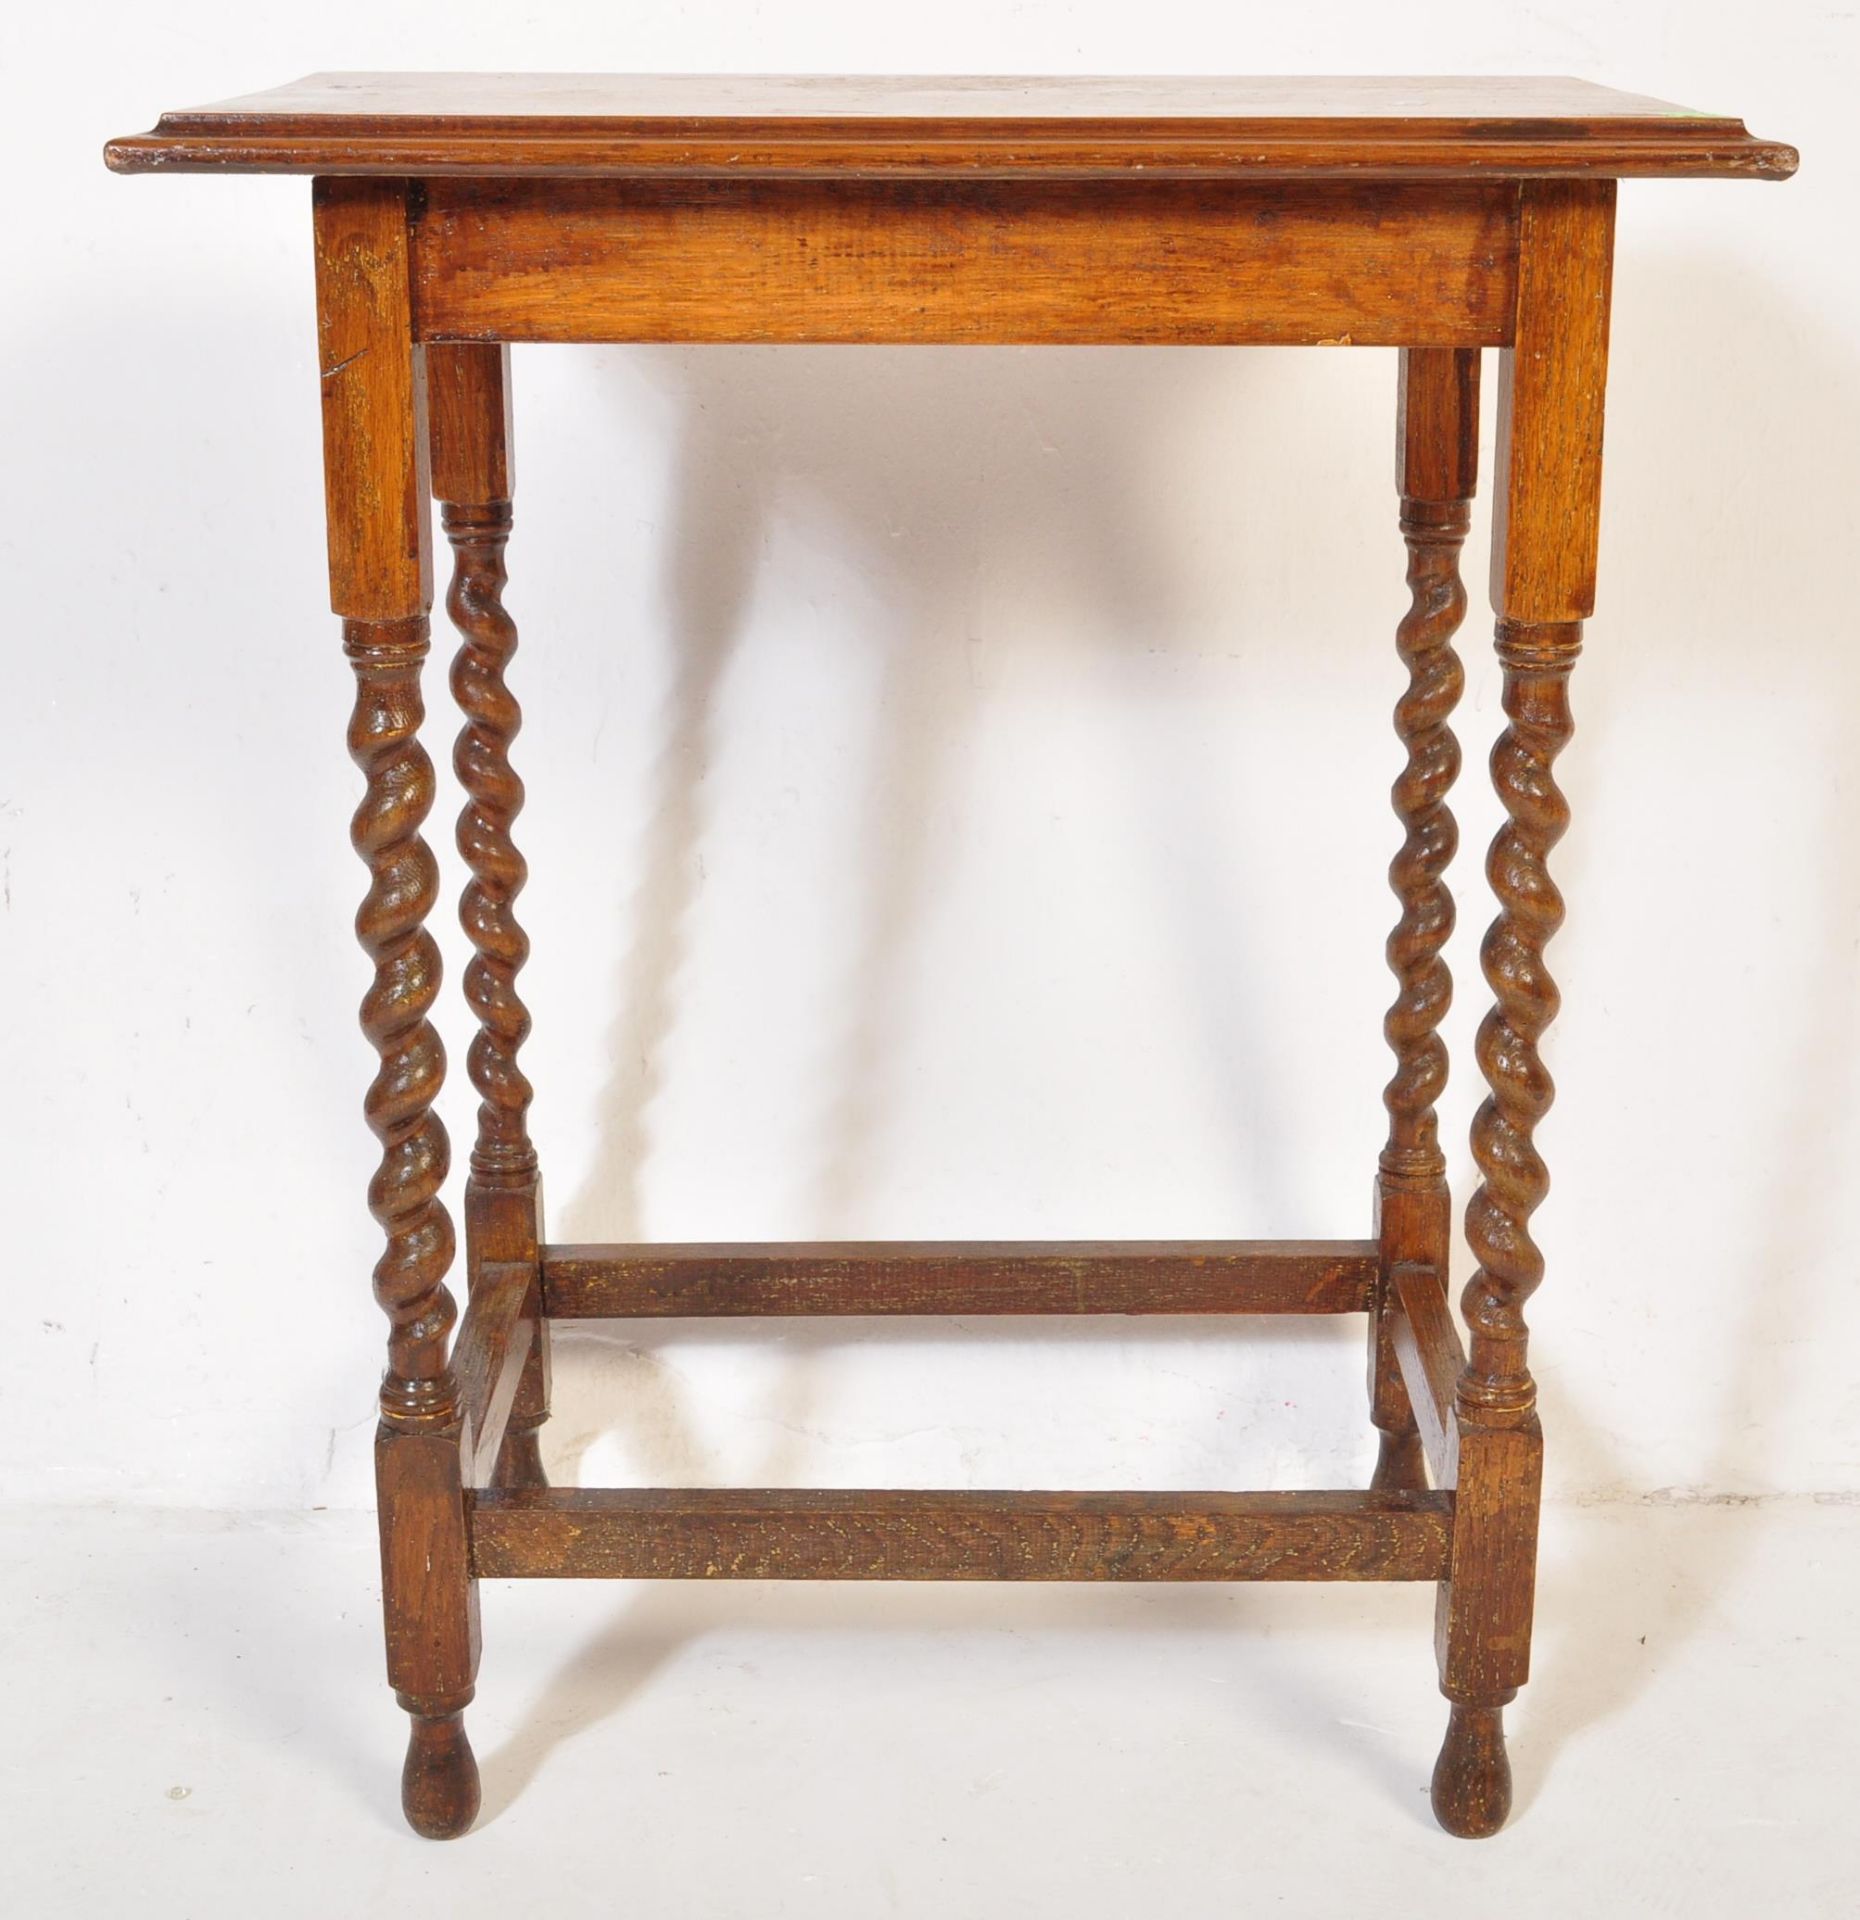 EARLY 20TH CENTURY BARELY TWIST OAK OCCASIONAL SIDE HALL TABLE - Image 2 of 5